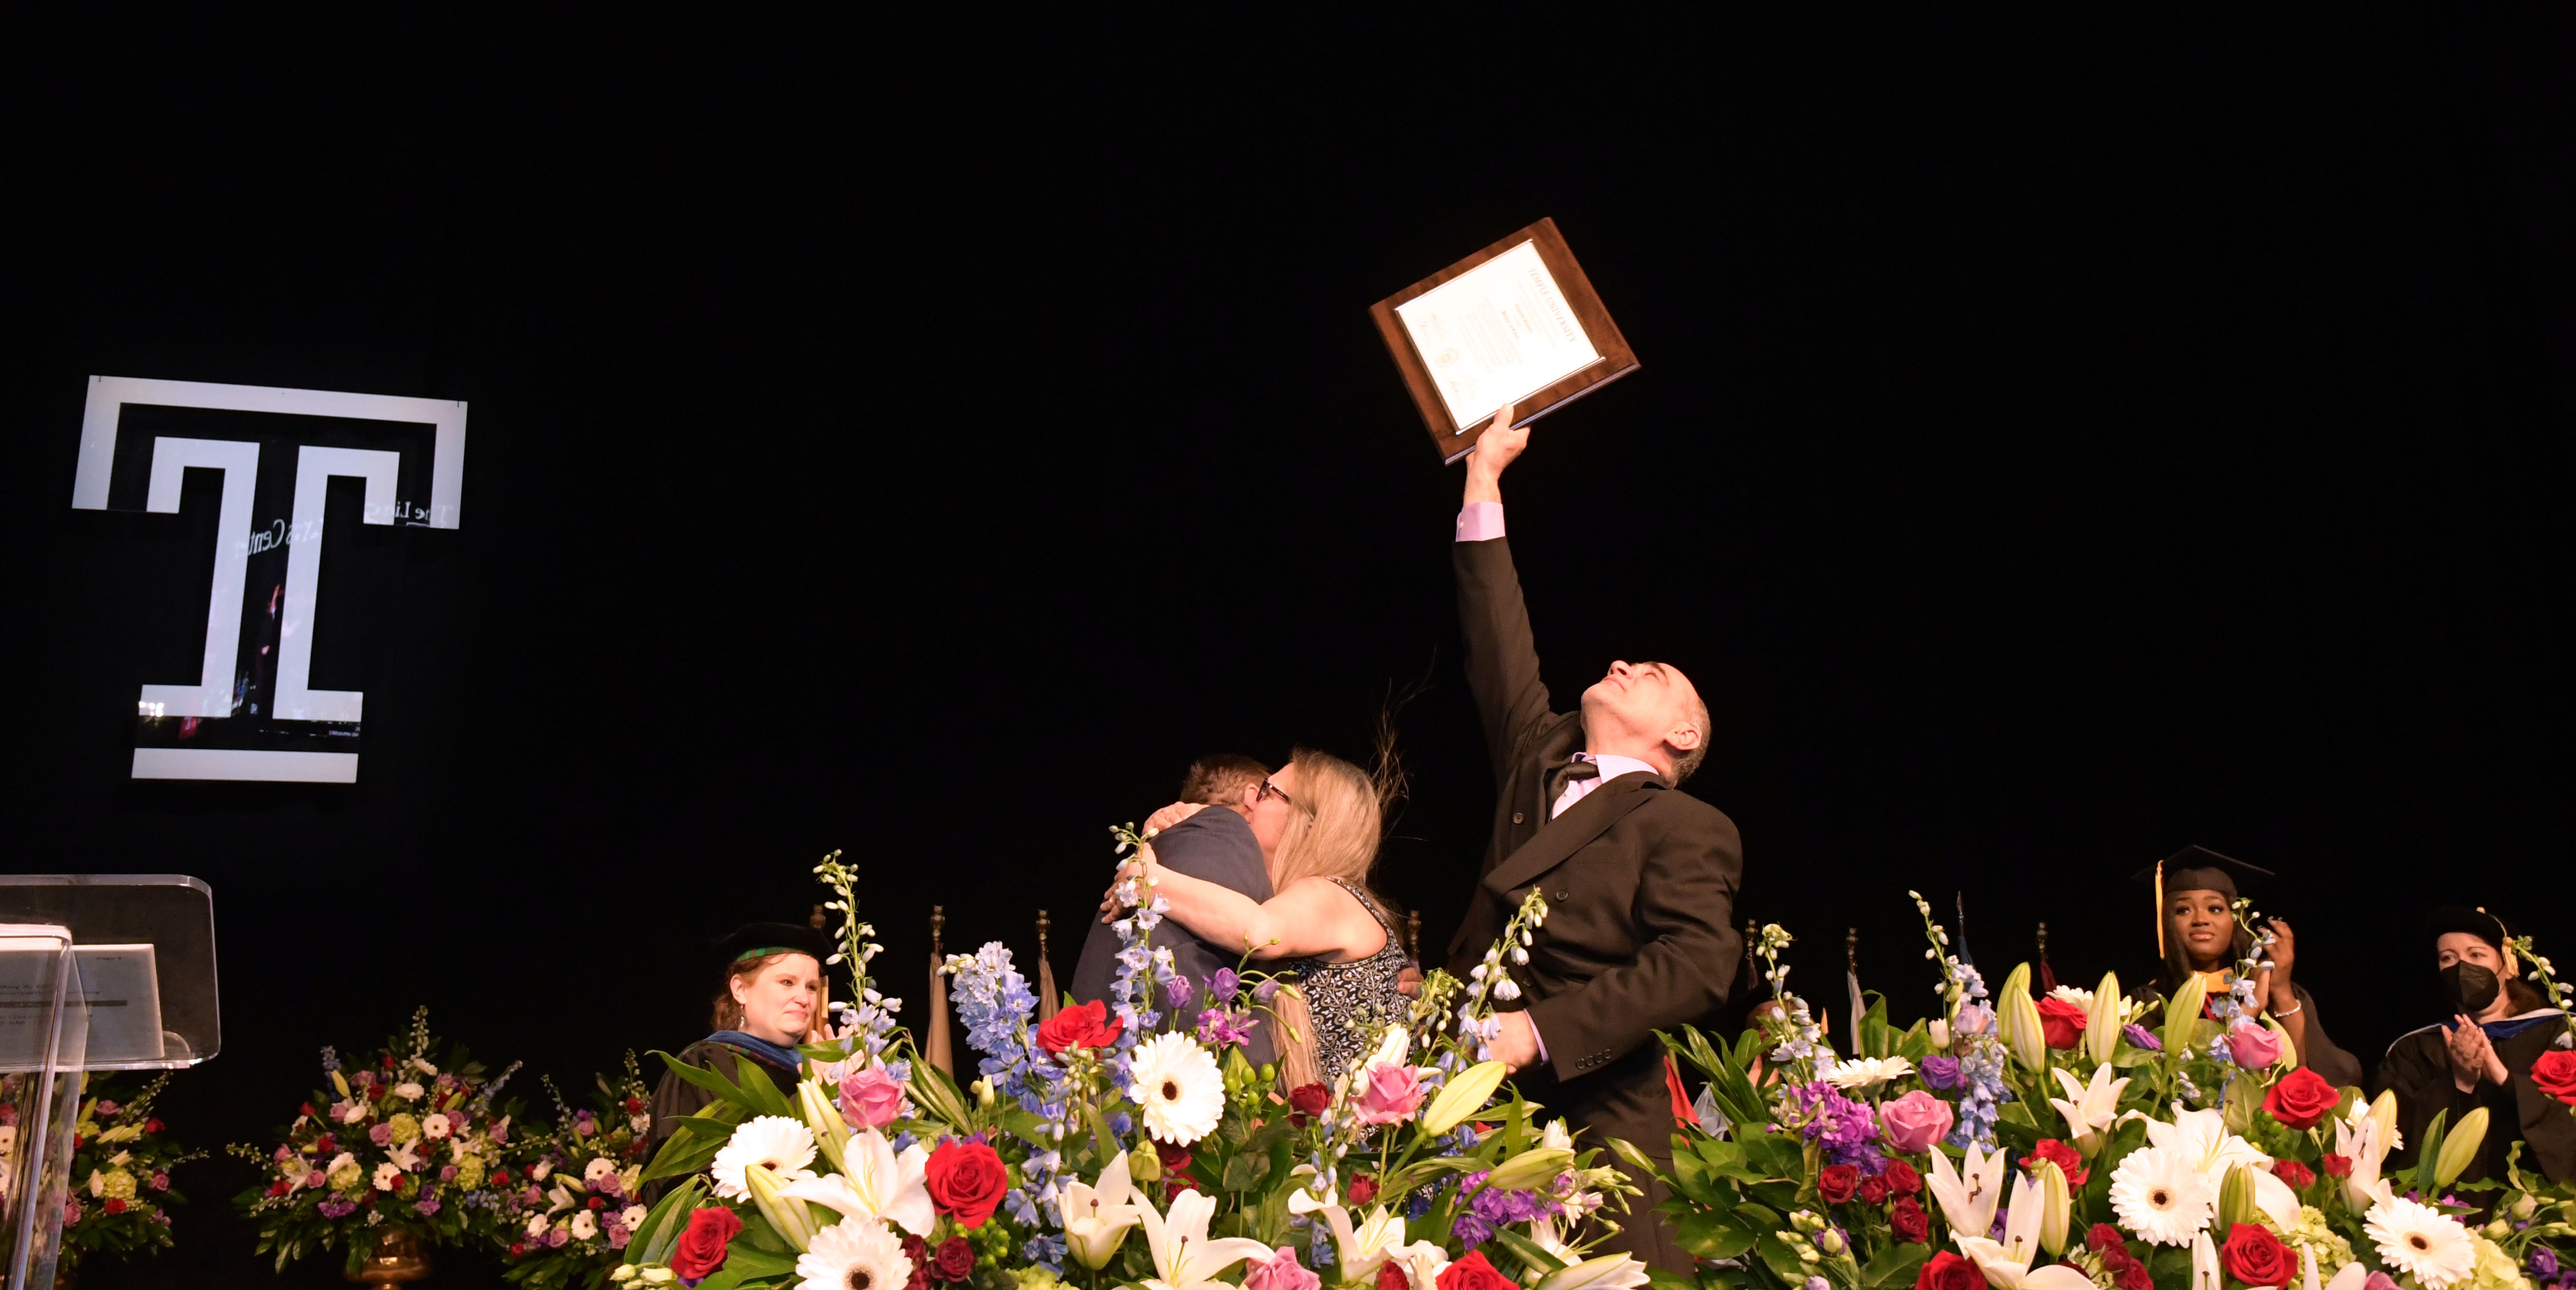 man holds plaque toward the sky while others embrace on the stage